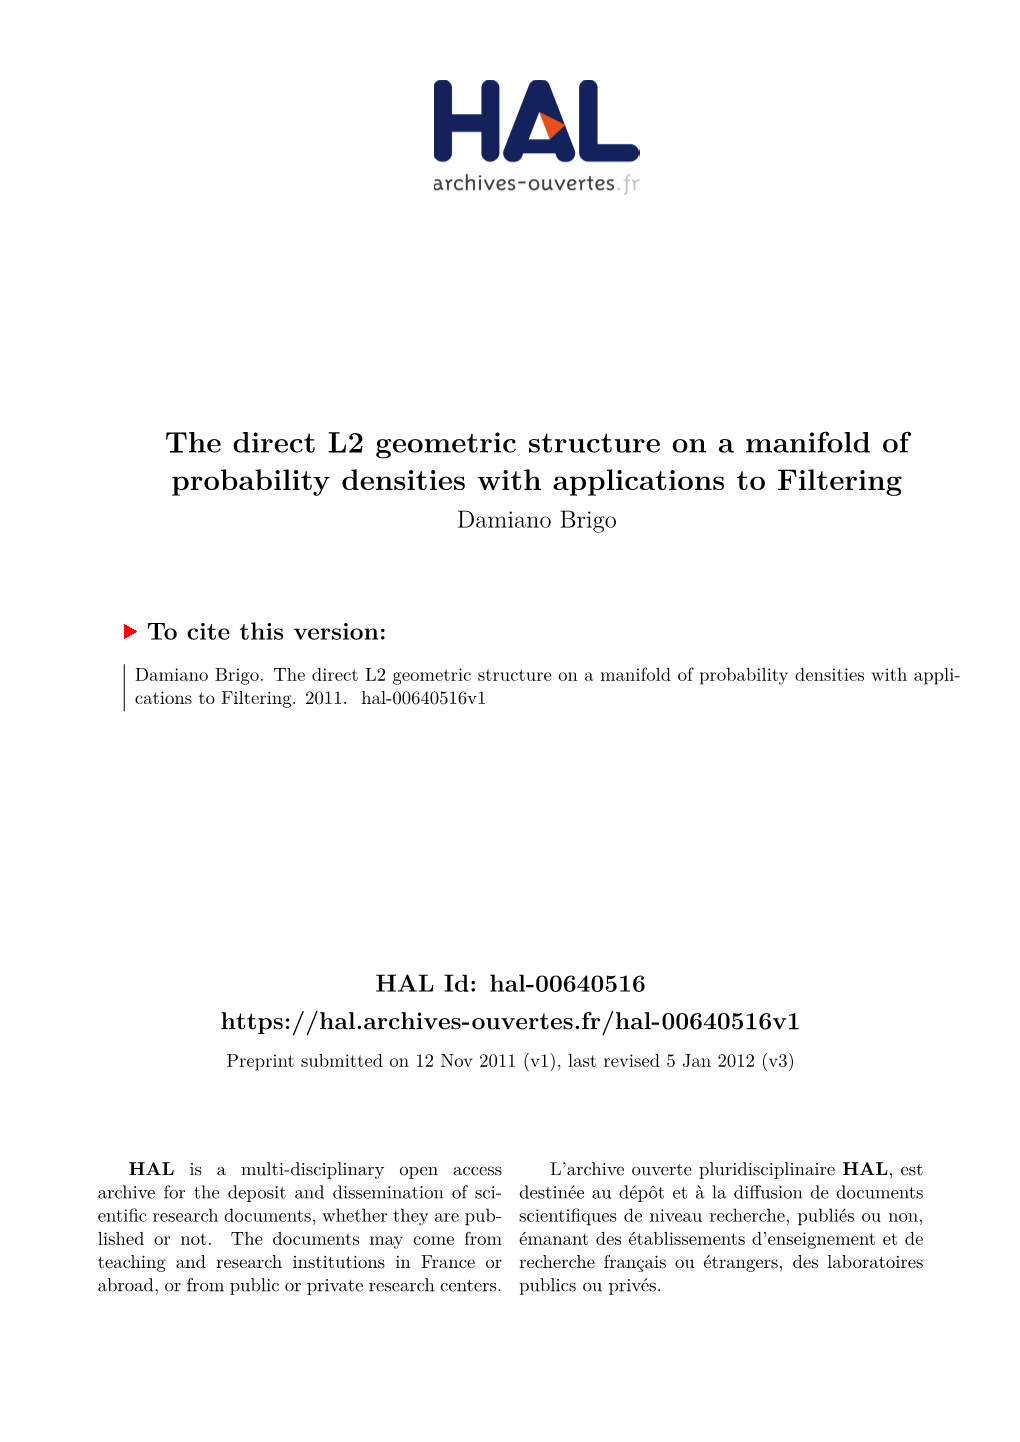 The Direct L2 Geometric Structure on a Manifold of Probability Densities with Applications to Filtering Damiano Brigo